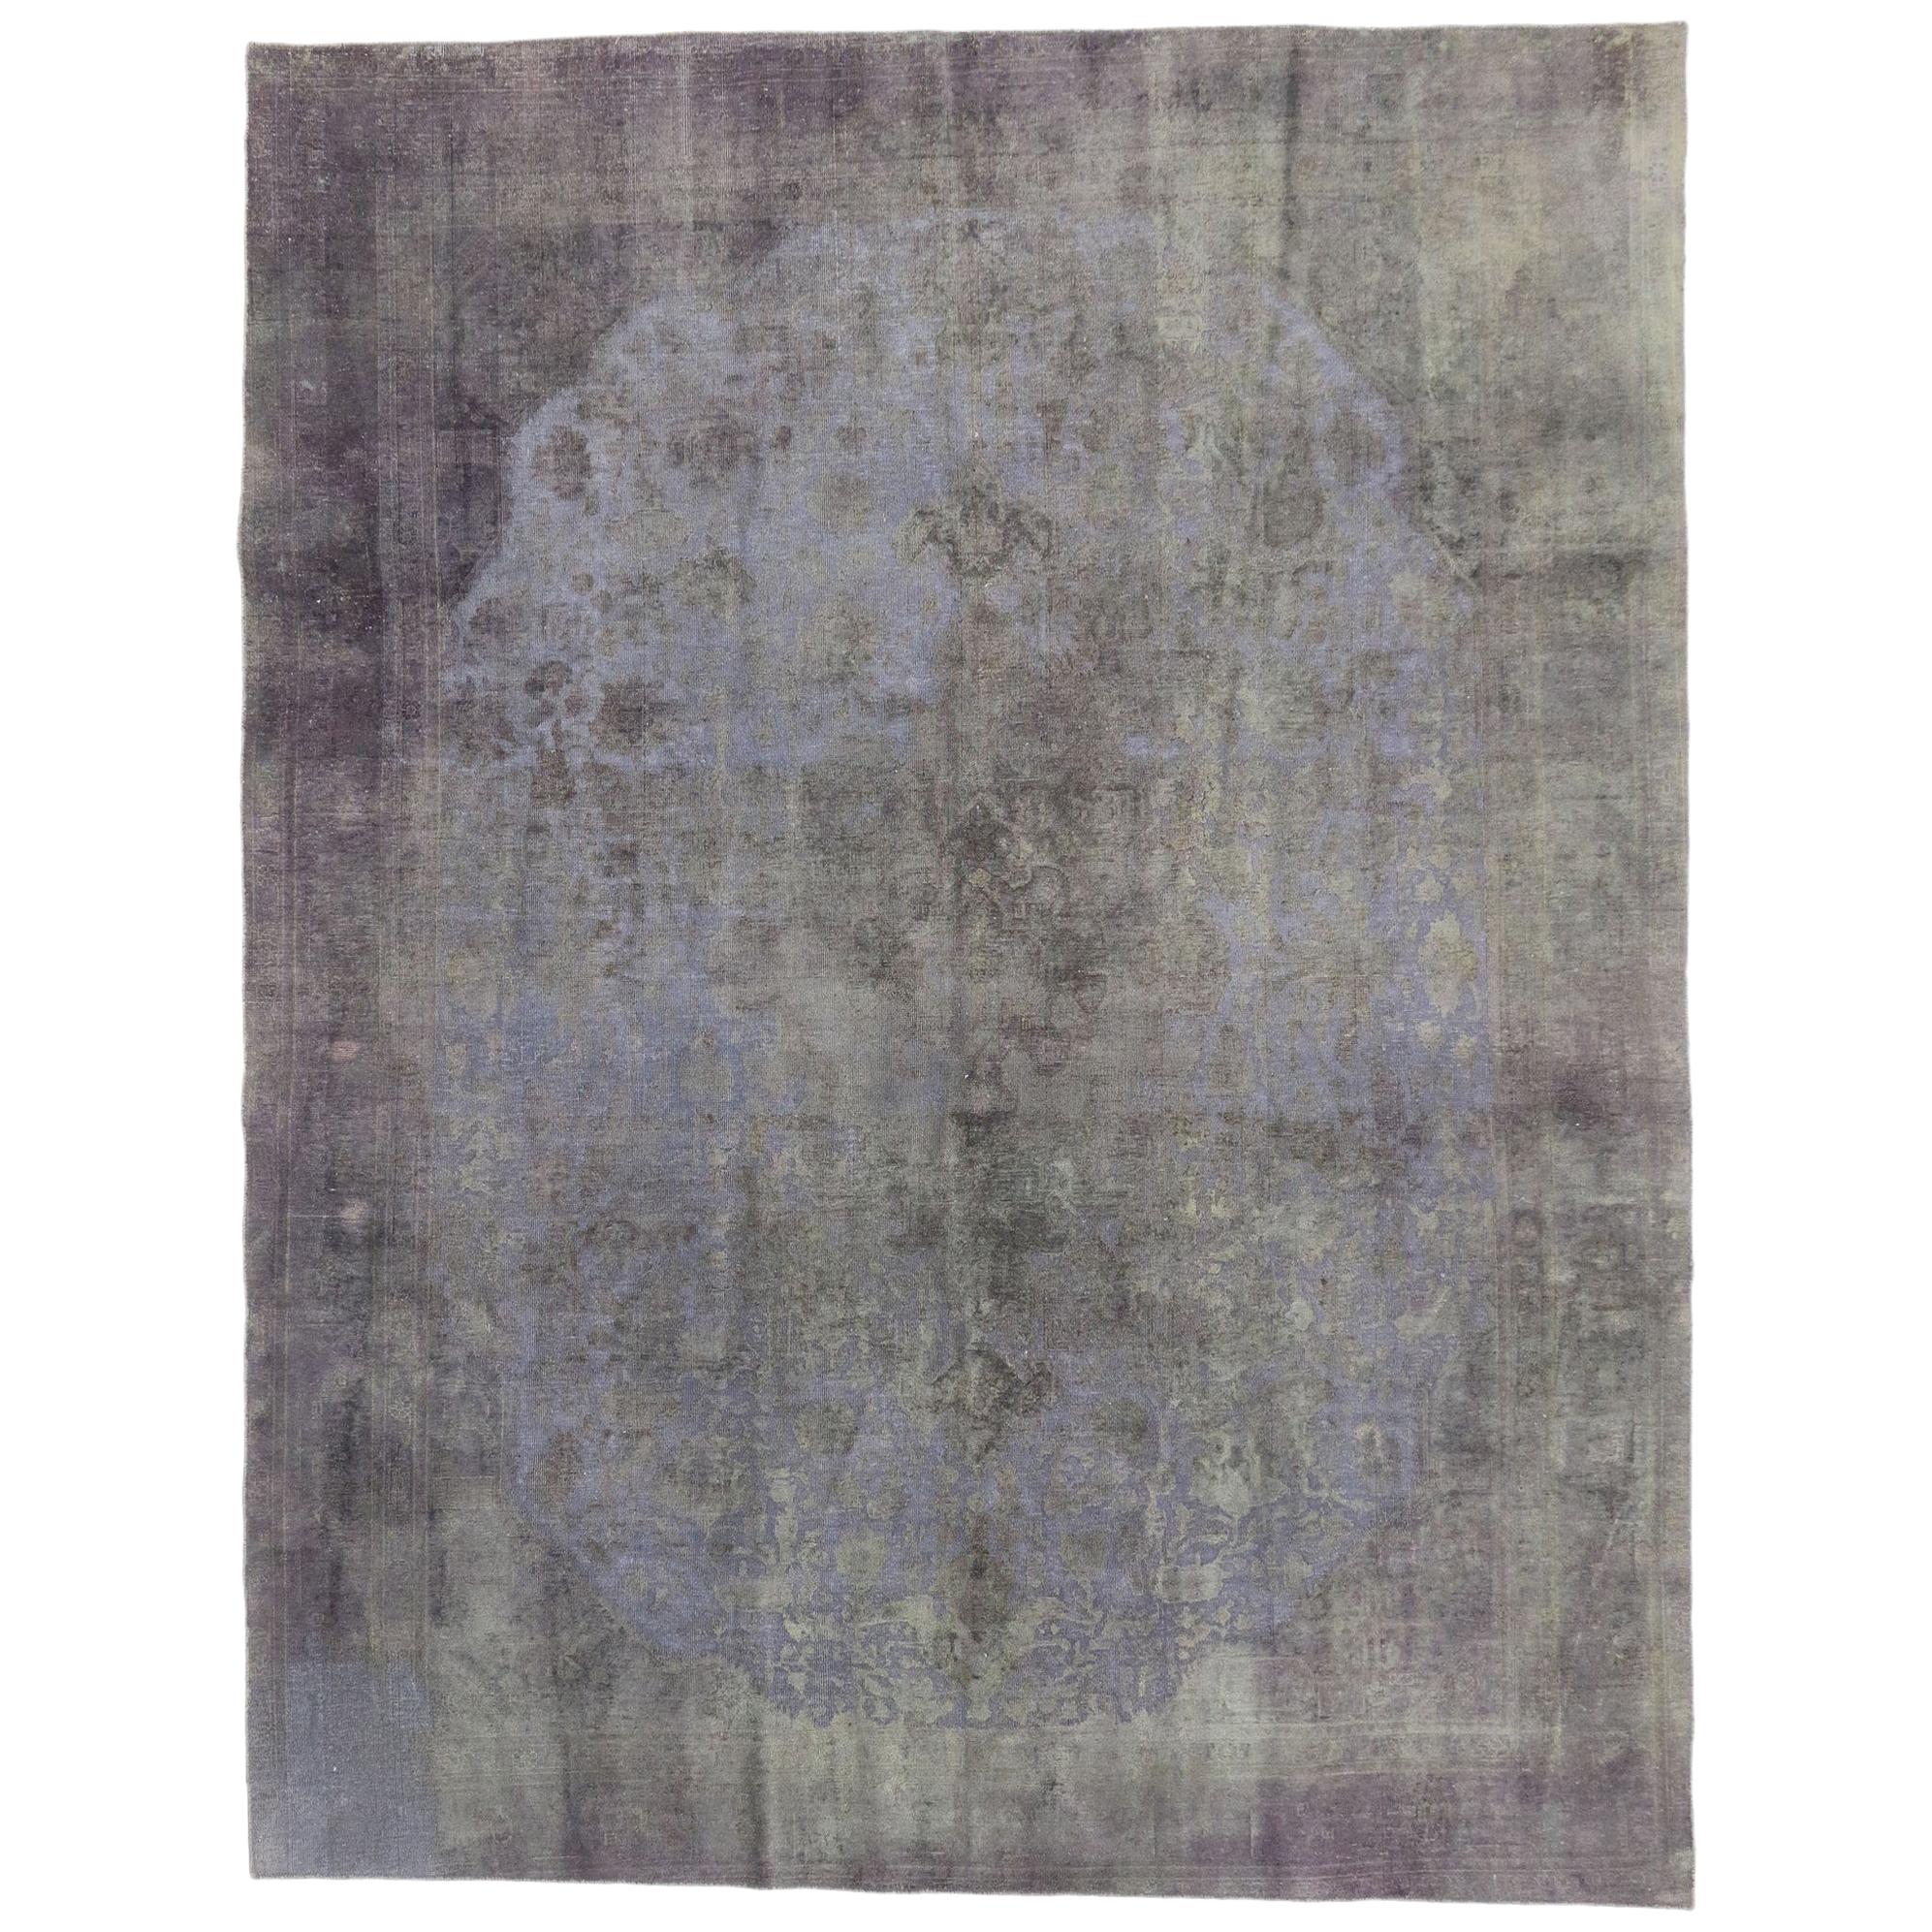 Distressed Vintage Turkish Rug with Modern French Luxe Industrial Style